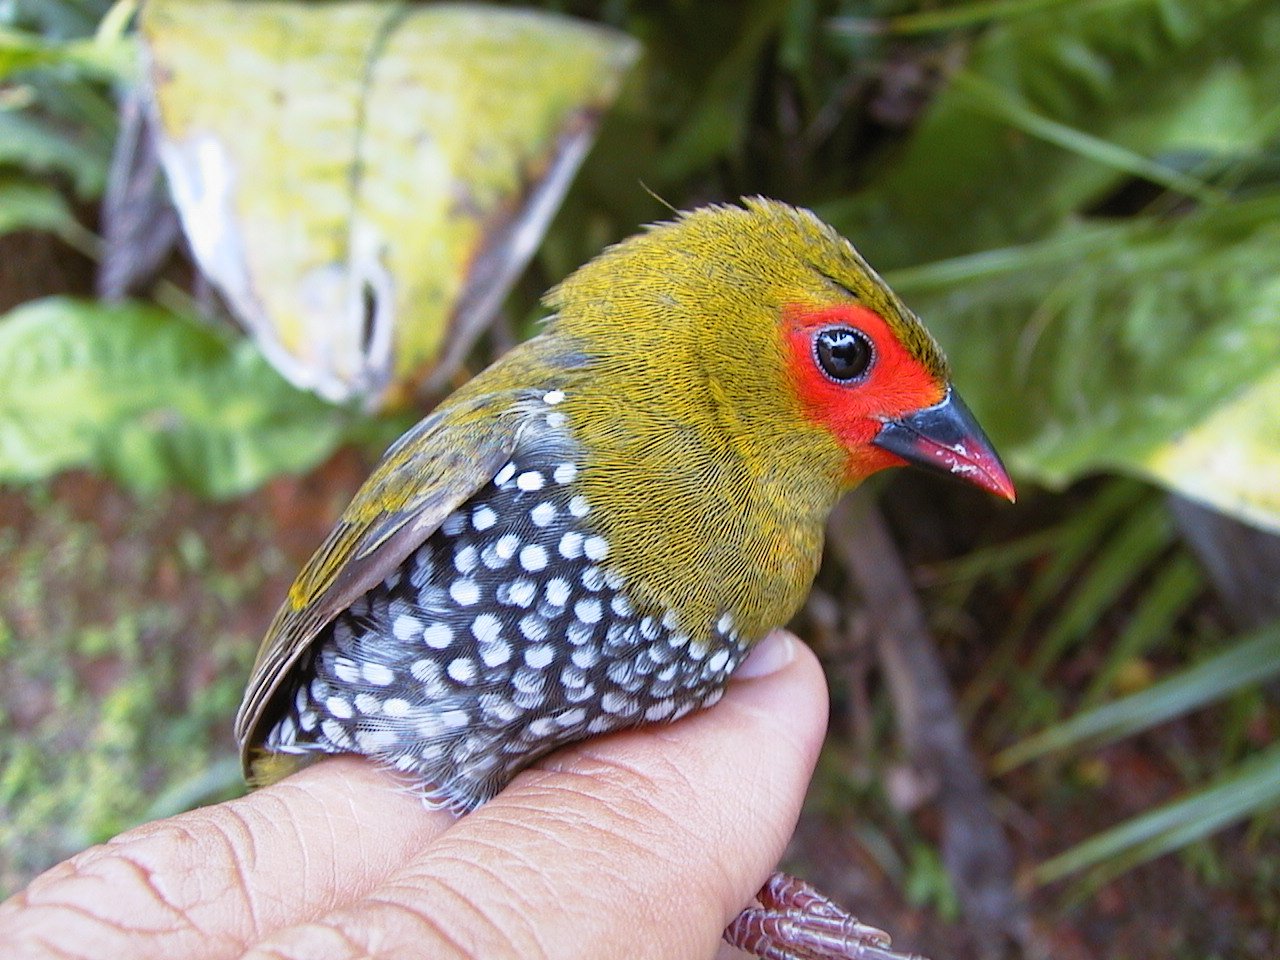 A small colorful Green-backed Twinspot bird held up close to the camera